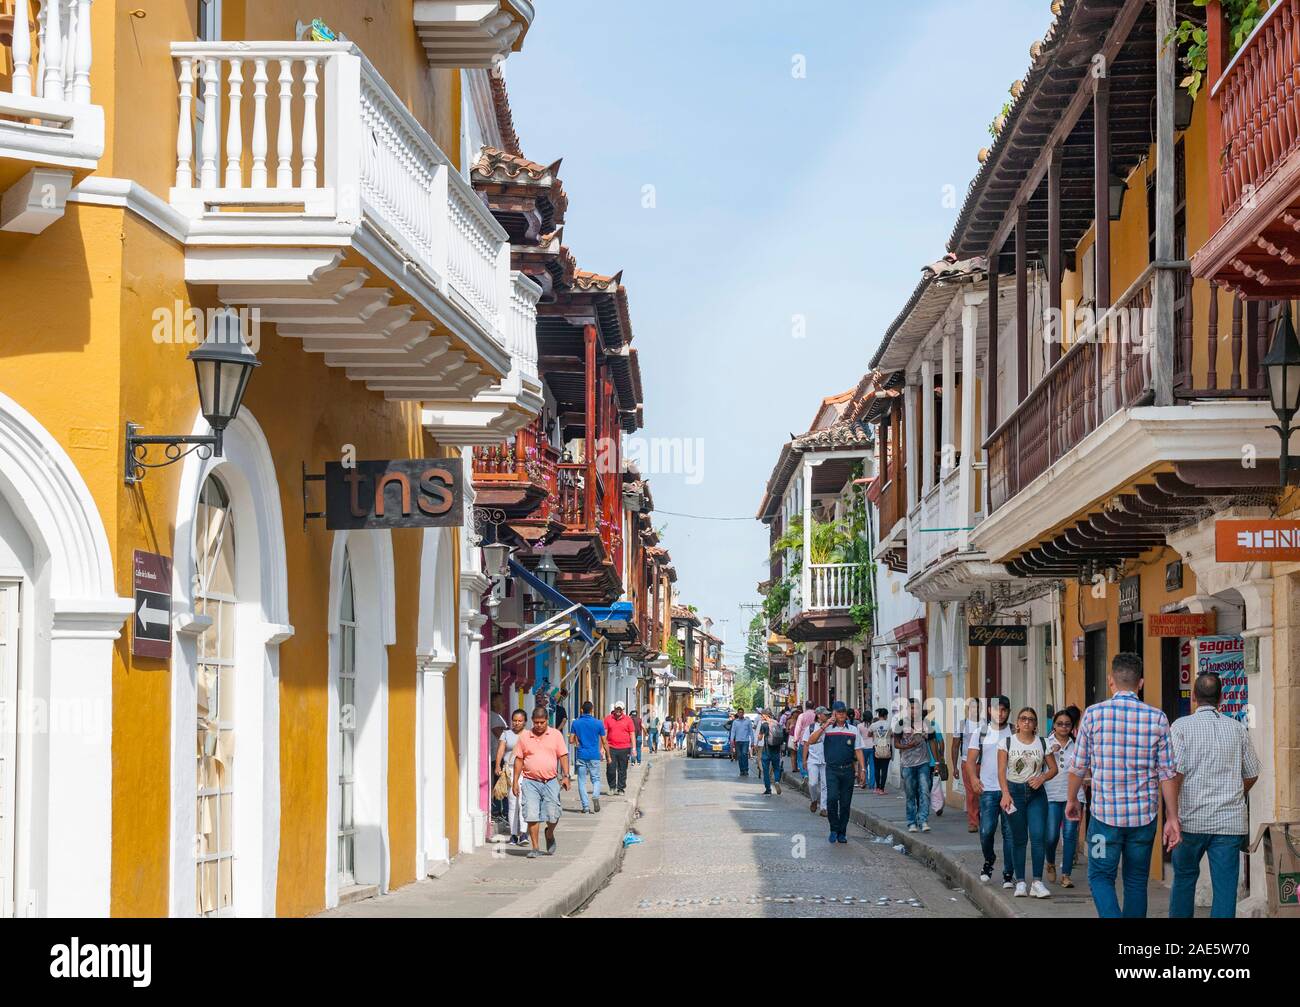 A street and buildings in the old city in Cartagena, Colombia. Stock Photo